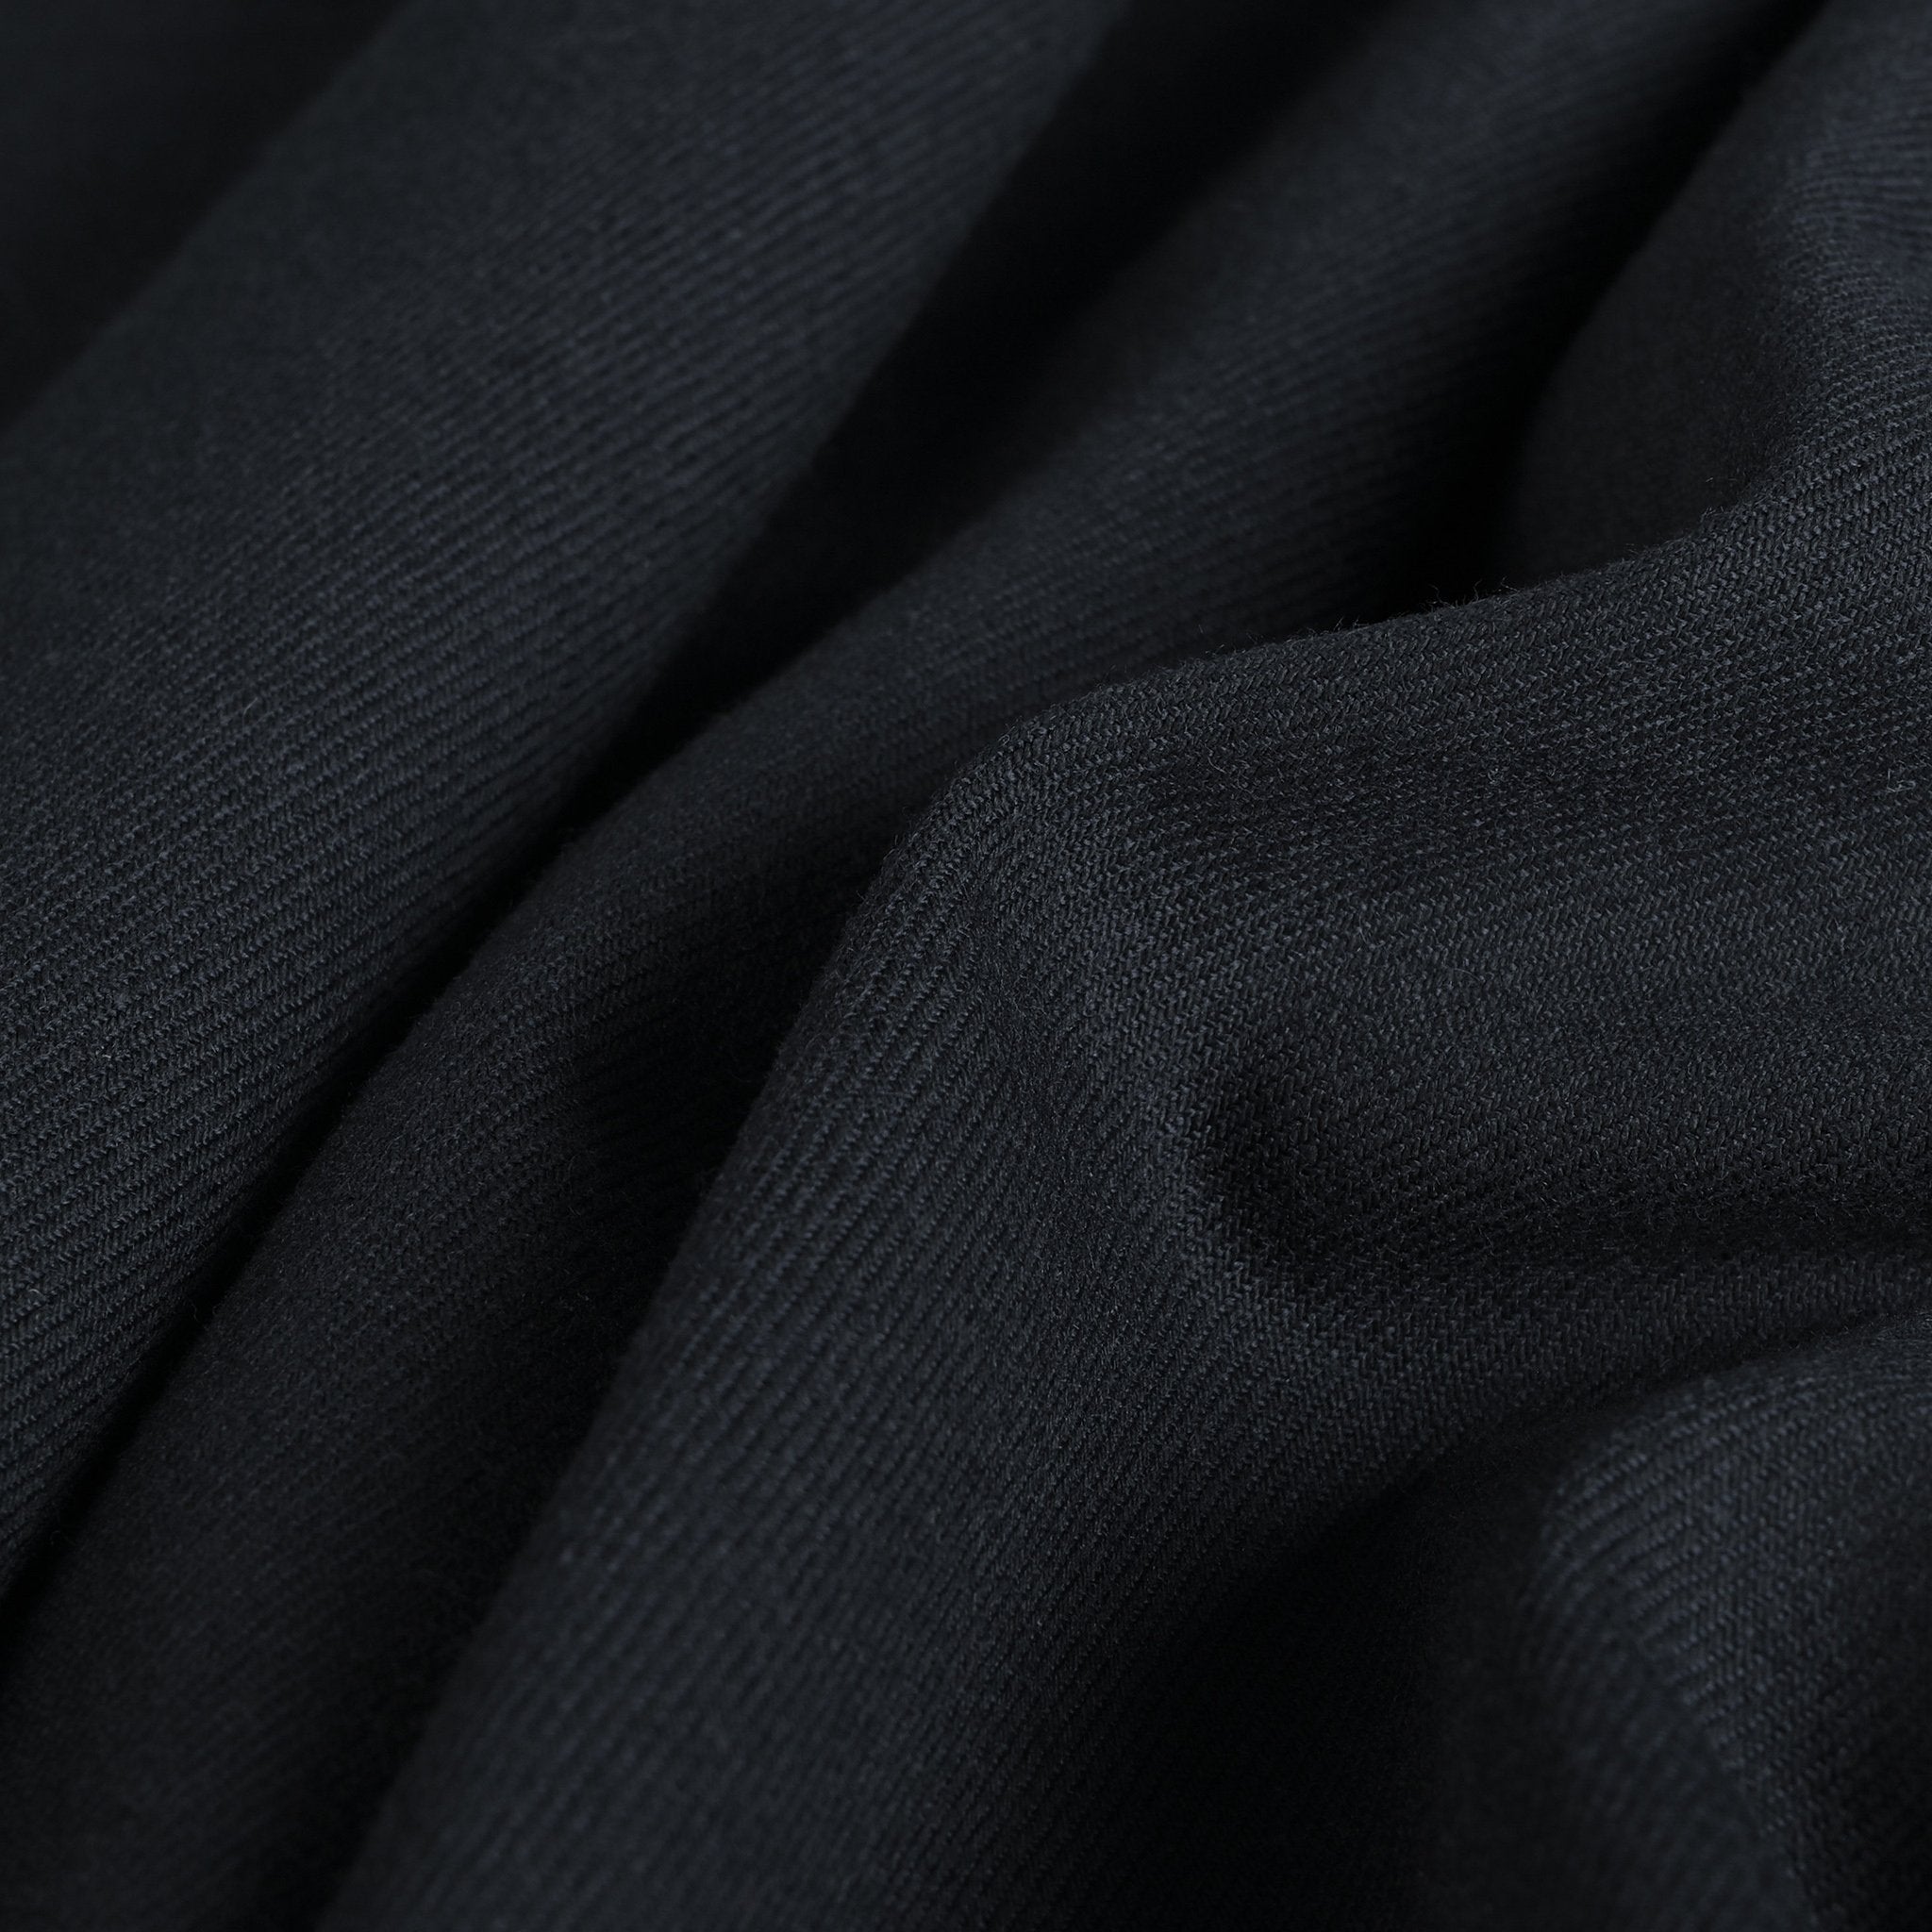 Midnight Suiting Stretchy Fabric 4679